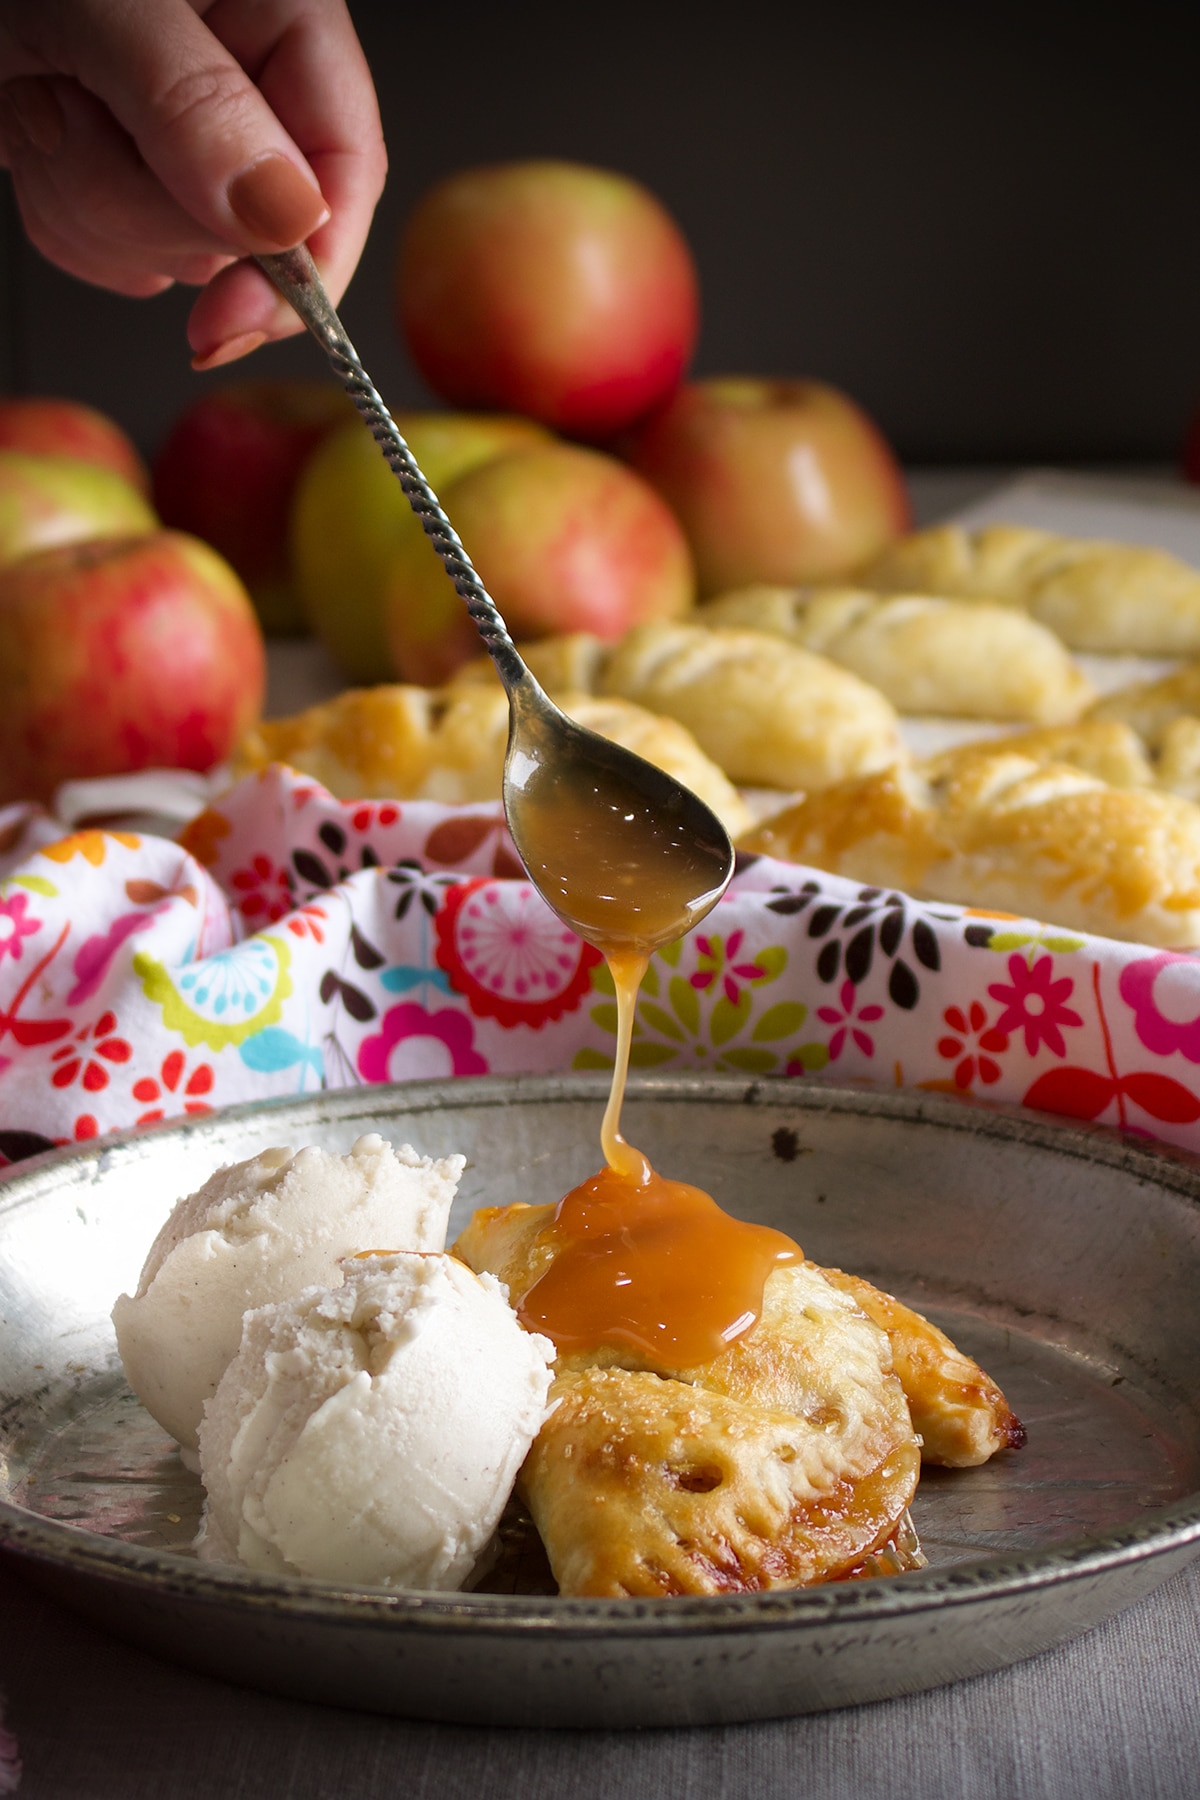 Using a spoon to drizzle salted caramel sauce over two apple butter hand pies on a tin plate.